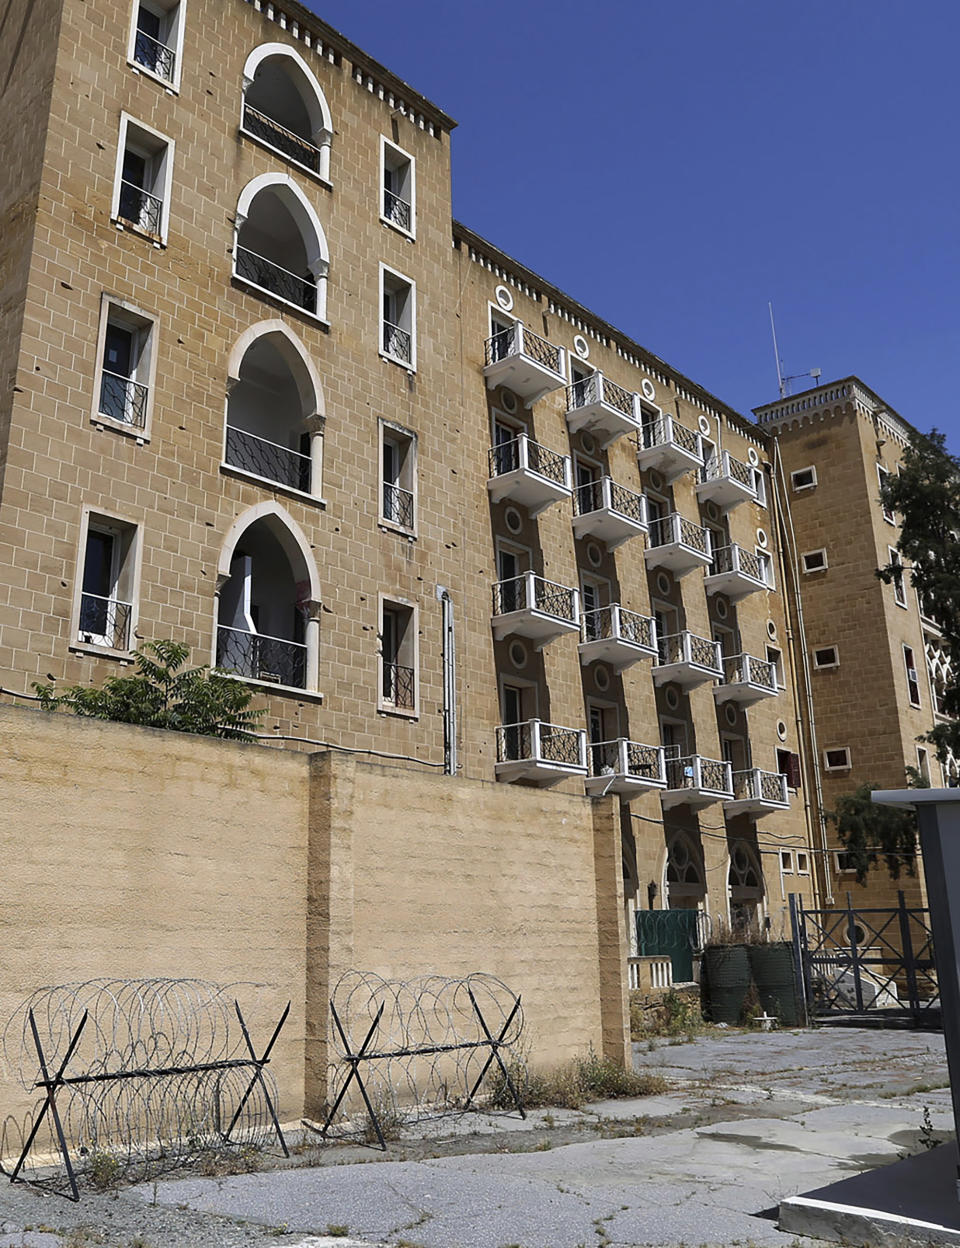 In this Saturday, May 18, 2019 photo, the Ledra Palace Hotel is seen with the holes from bullets during the coup and the Turkish invasion, inside the U.N. buffer zone in the divided capital Nicosia, Cyprus. This grand hotel still manages to hold onto a flicker of its old majesty despite the mortal shell craters and bullet holes scarring its sandstone facade. Amid war in the summer of 1974 that cleaved Cyprus along ethnic lines, United Nations peacekeepers took over the Ledra Palace Hotel and instantly turned it into an emblem of the east Mediterranean island nation's division. (AP Photo/Petros Karadjias)